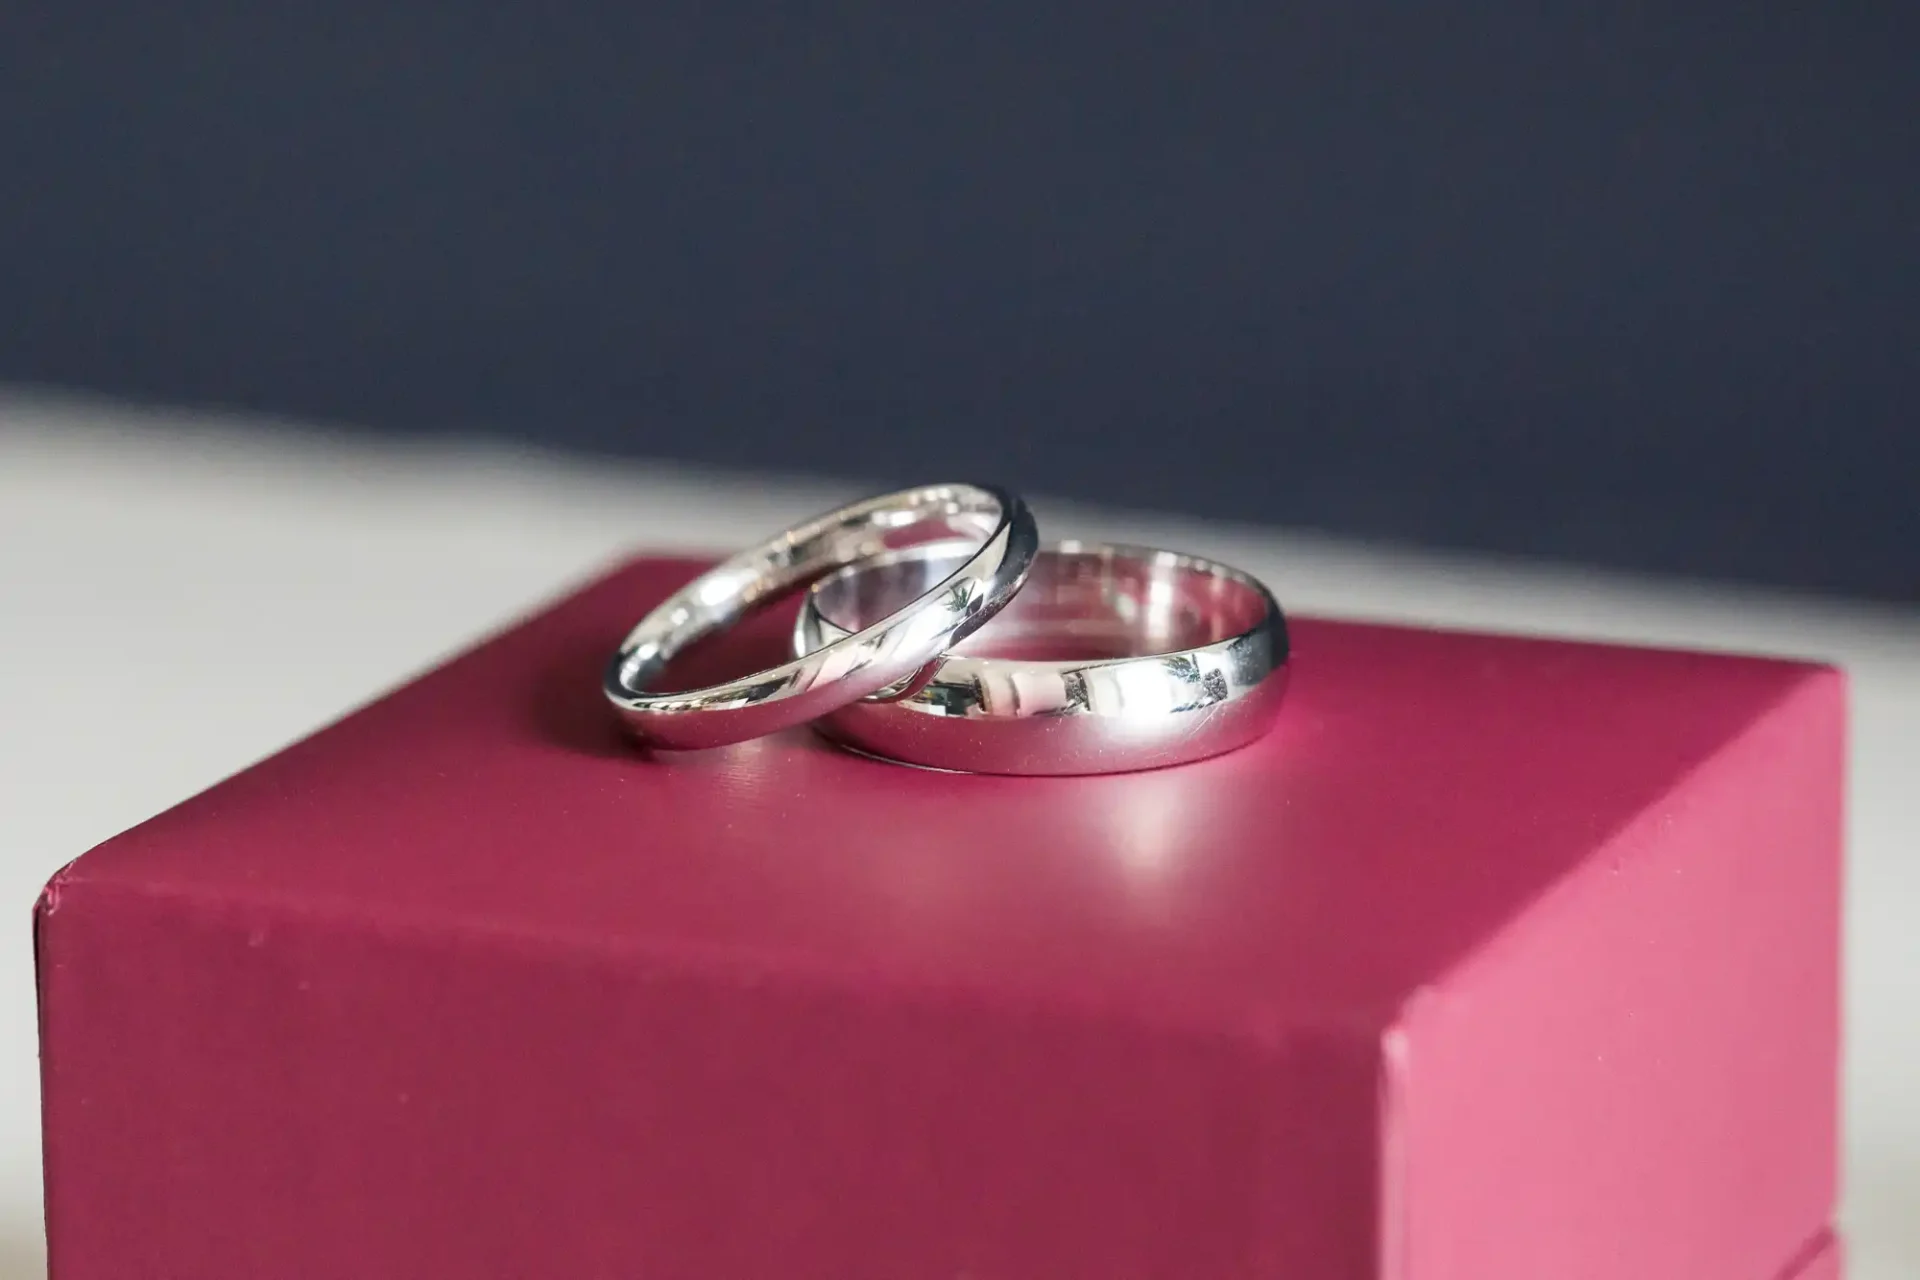 Two wedding rings on a pink box, one ring engraved with a visible design, against a soft-focus background.